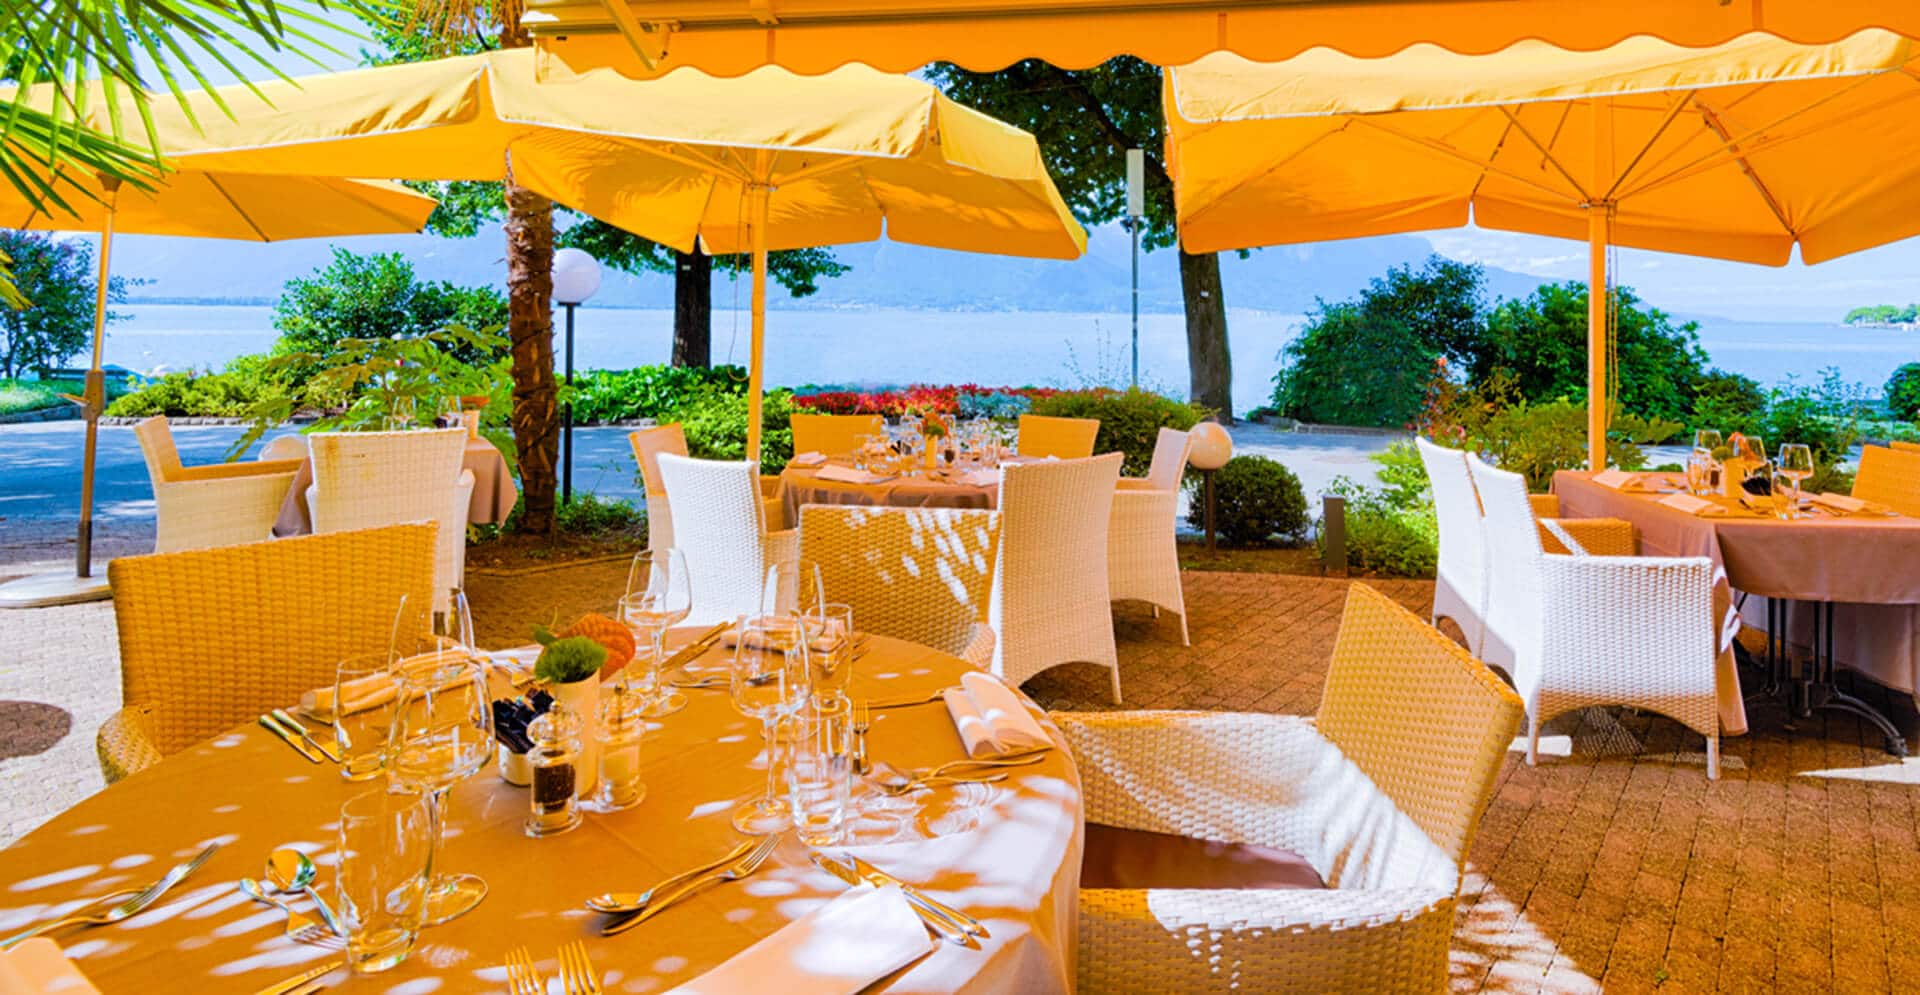 Outdoor seating area of Montreux Cafe Bellagio on a sunny day